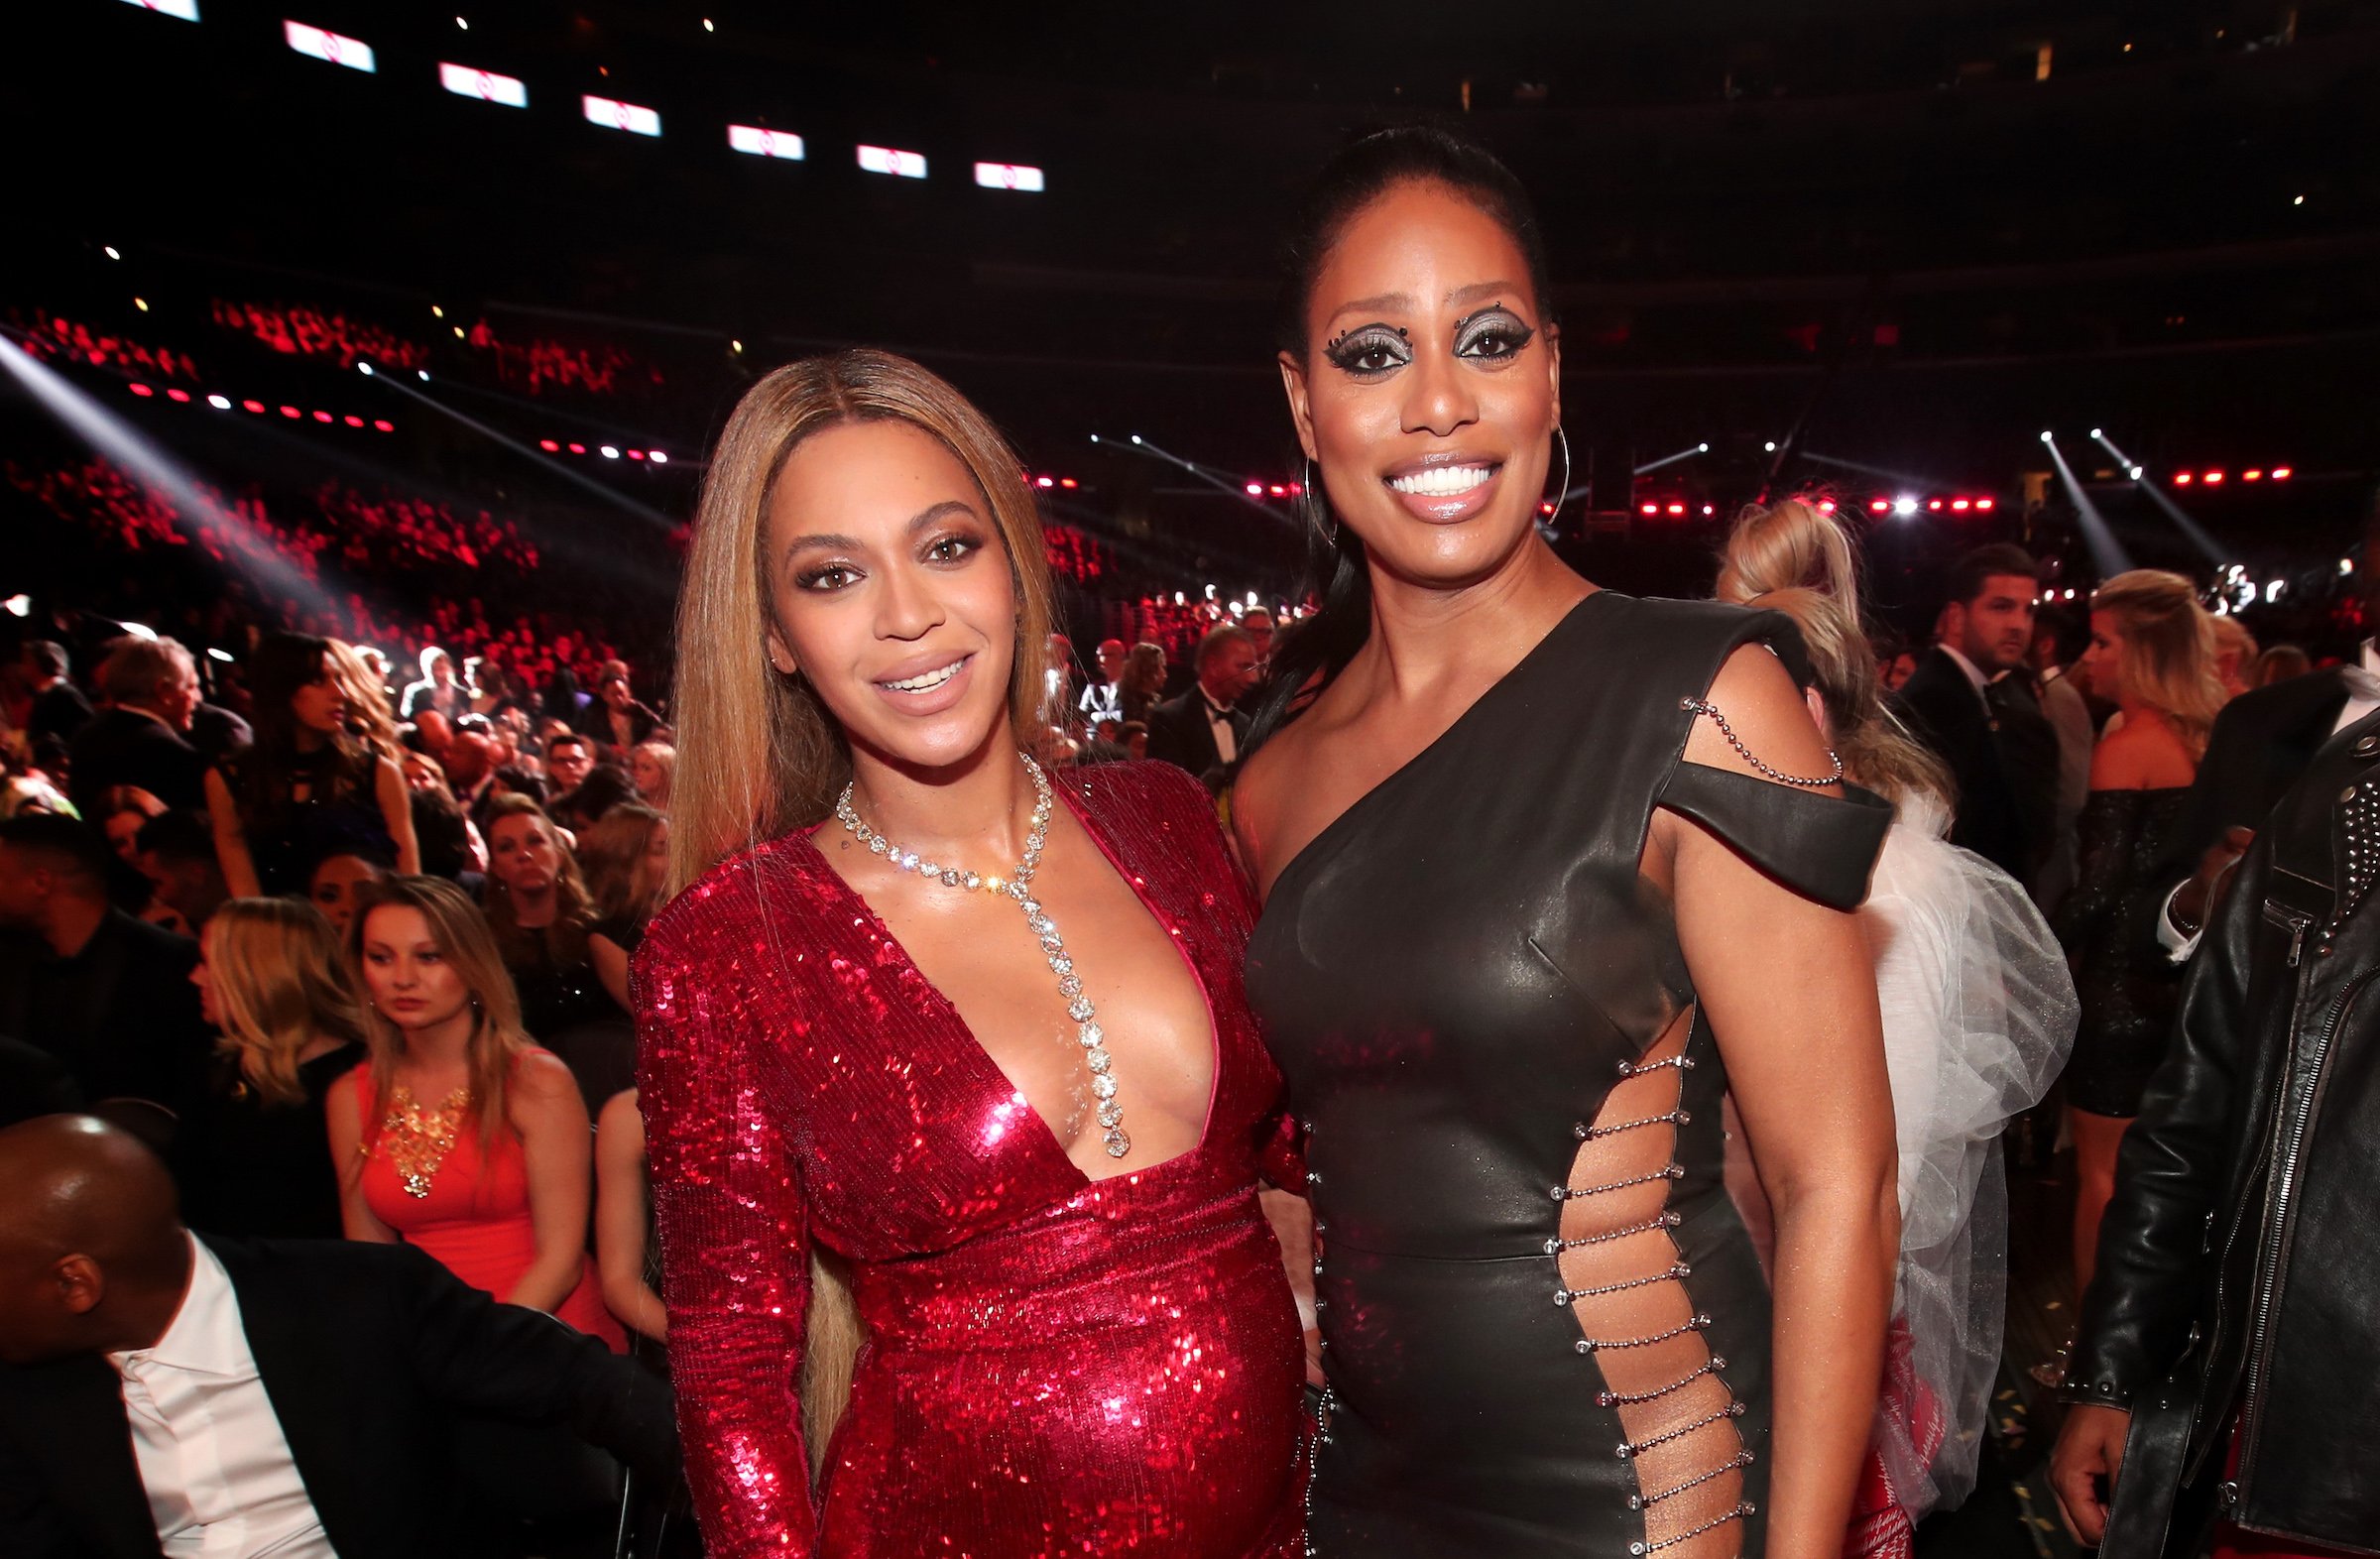 Beyoncé and Laverne Cox at the Grammy Awards. Beyoncé wearing red and Laverne wearing black.